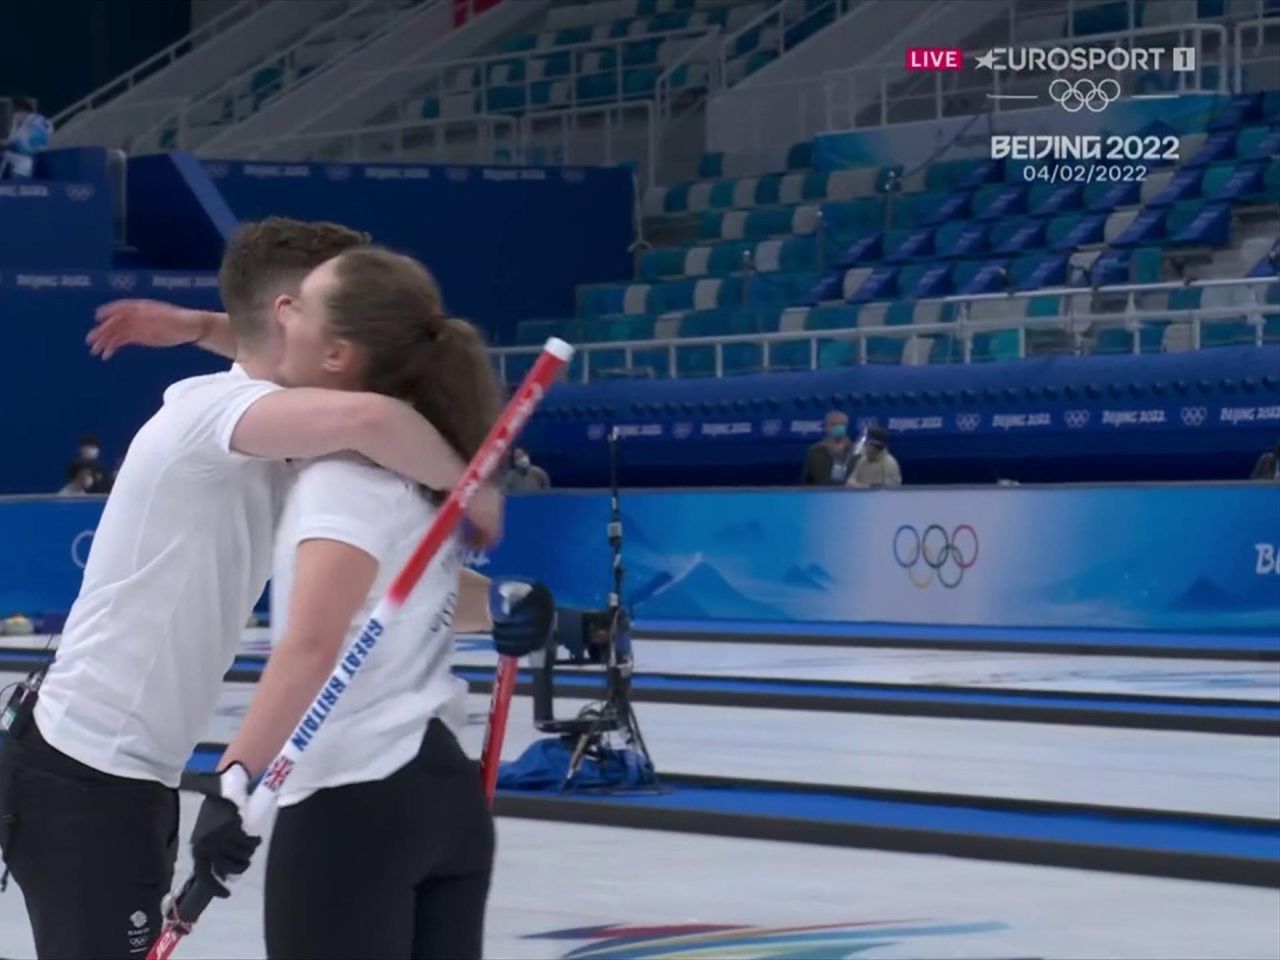 Winter Olympics 2022 - Jen Dodds and Bruce Mouat get GB off to winning start in curling - Curling video